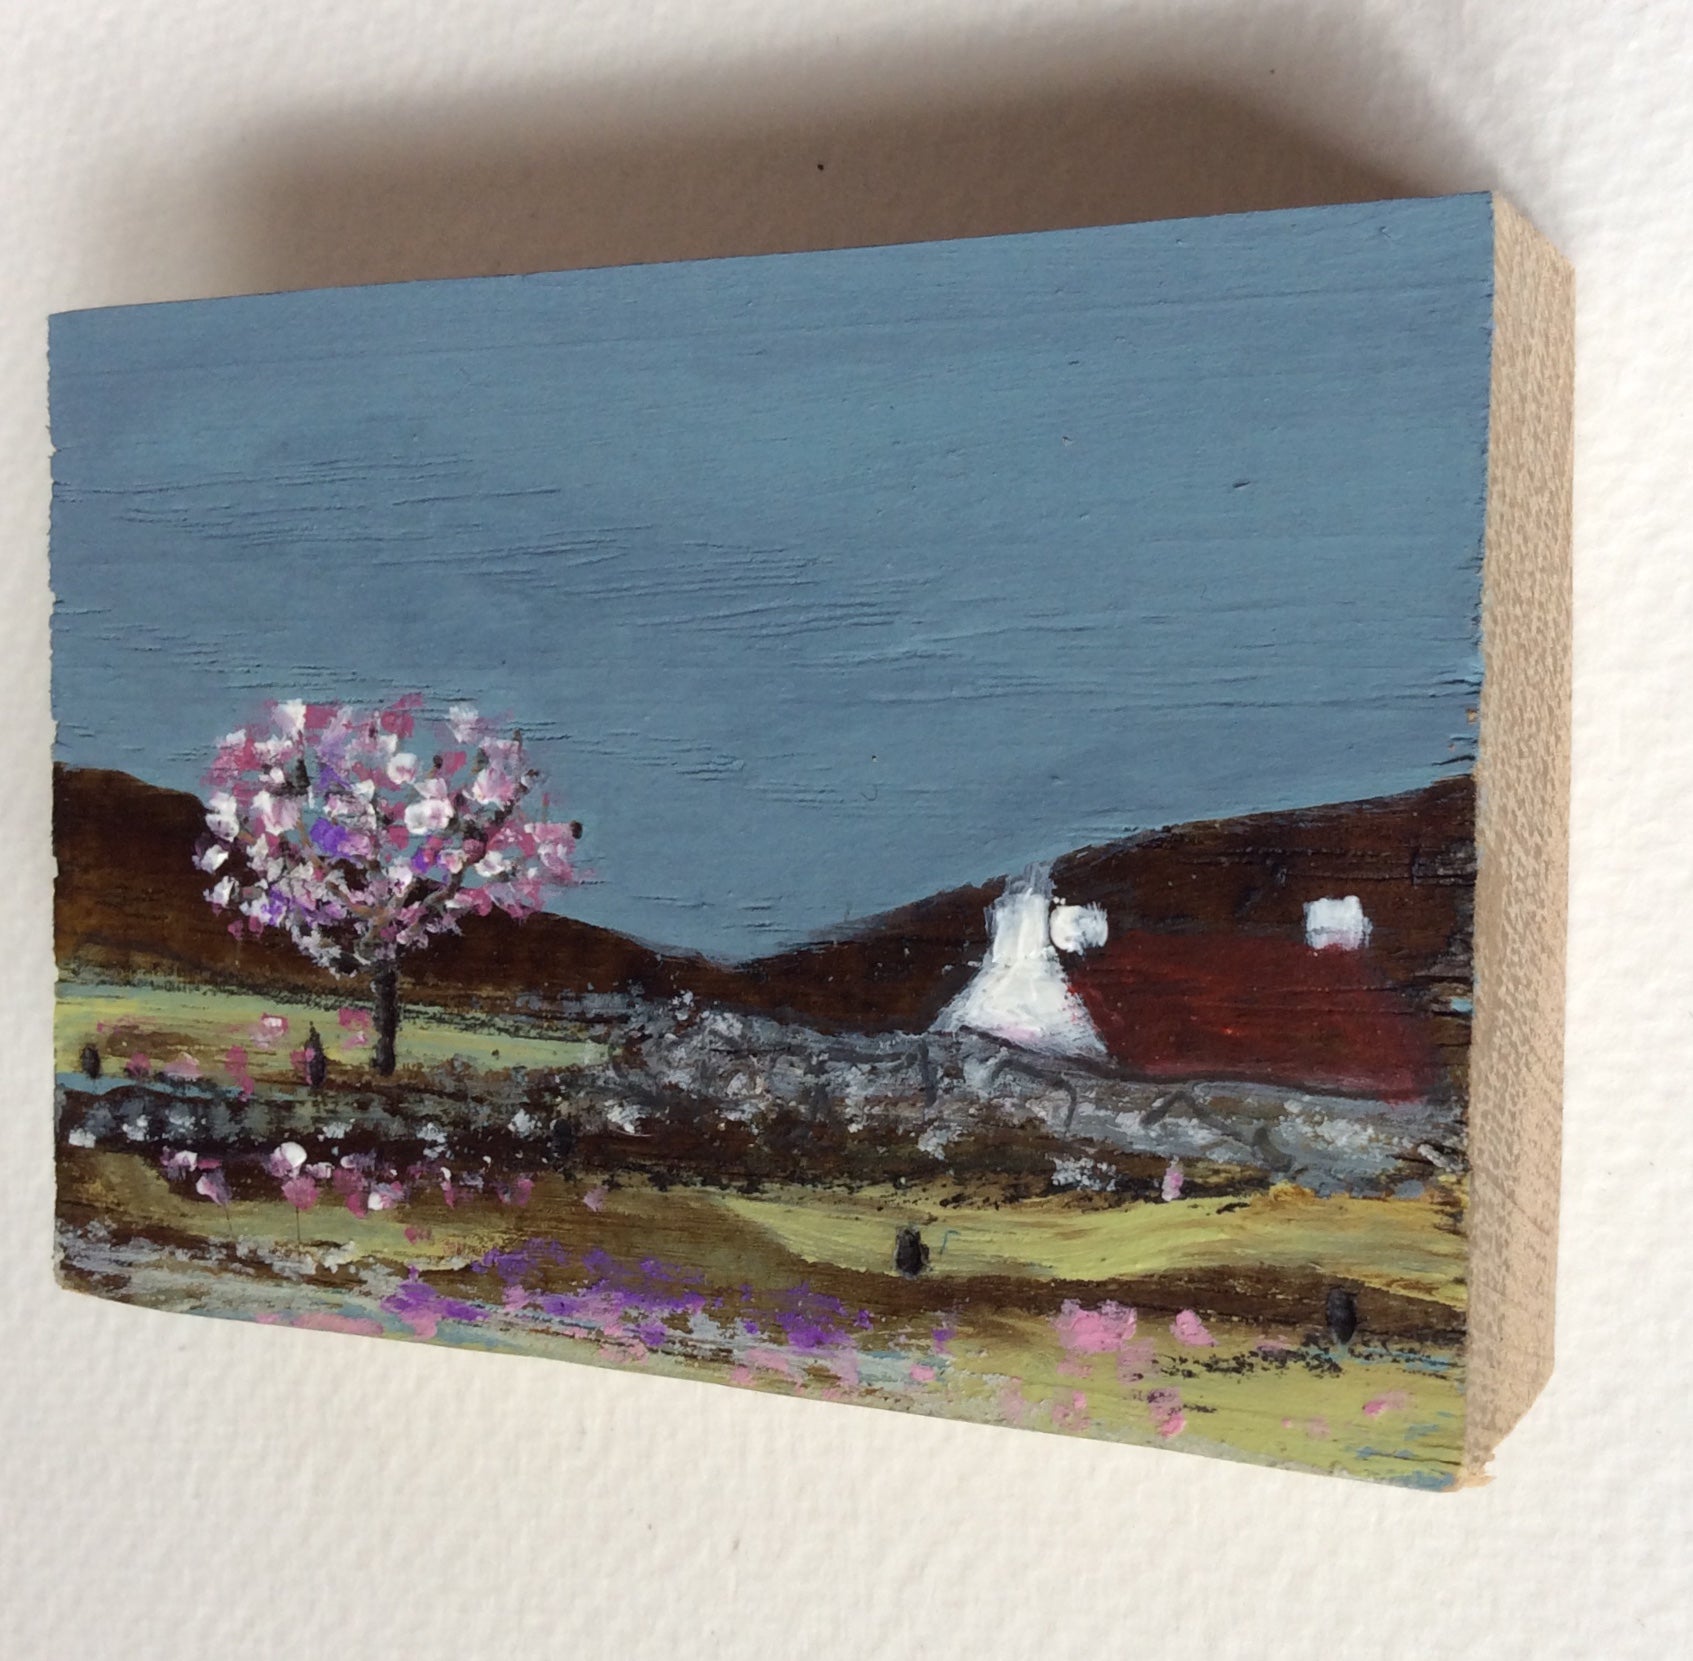 Miniature Mixed Media Art on wood By Louise O'Hara - "Spring blossom”